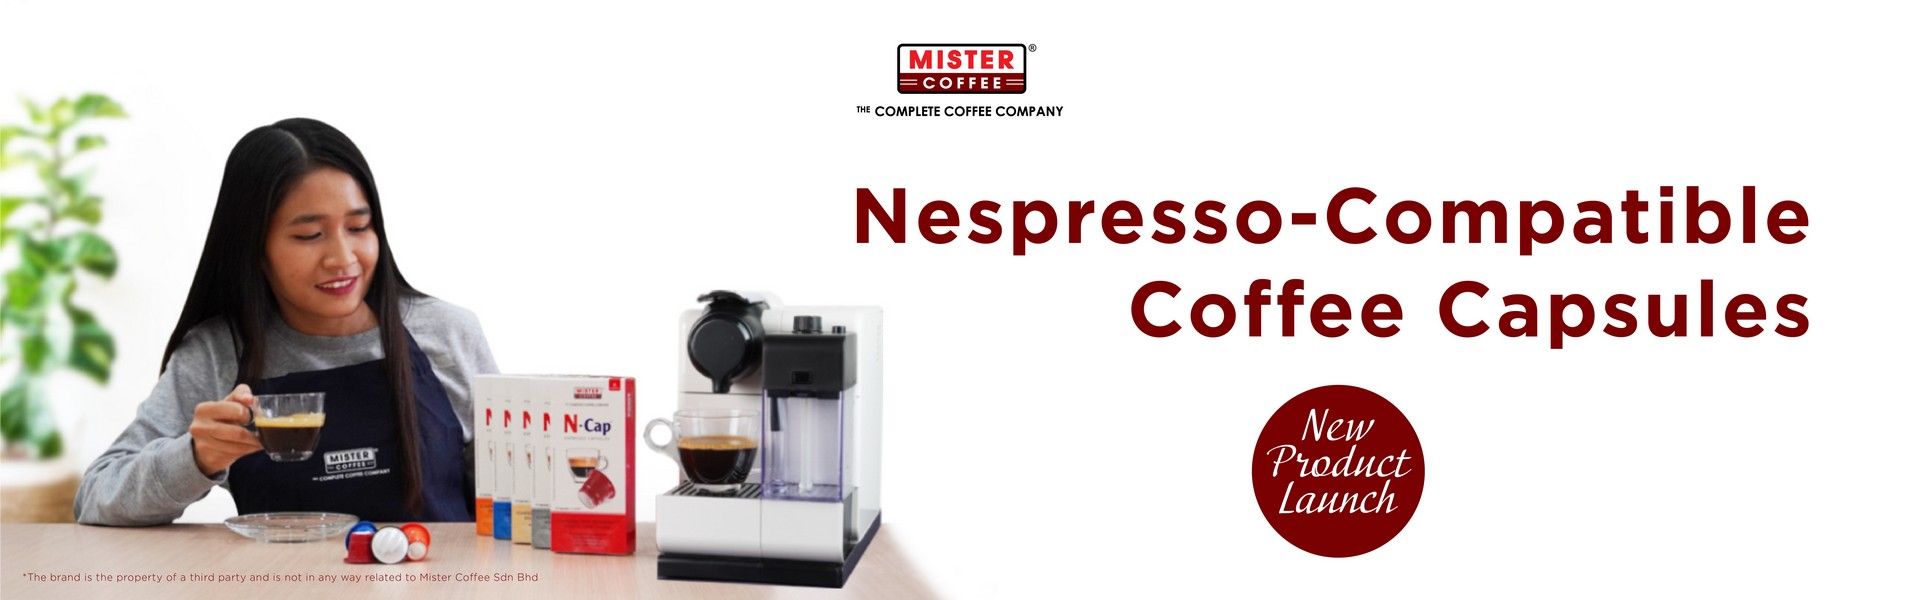 new product launch nepresso-06